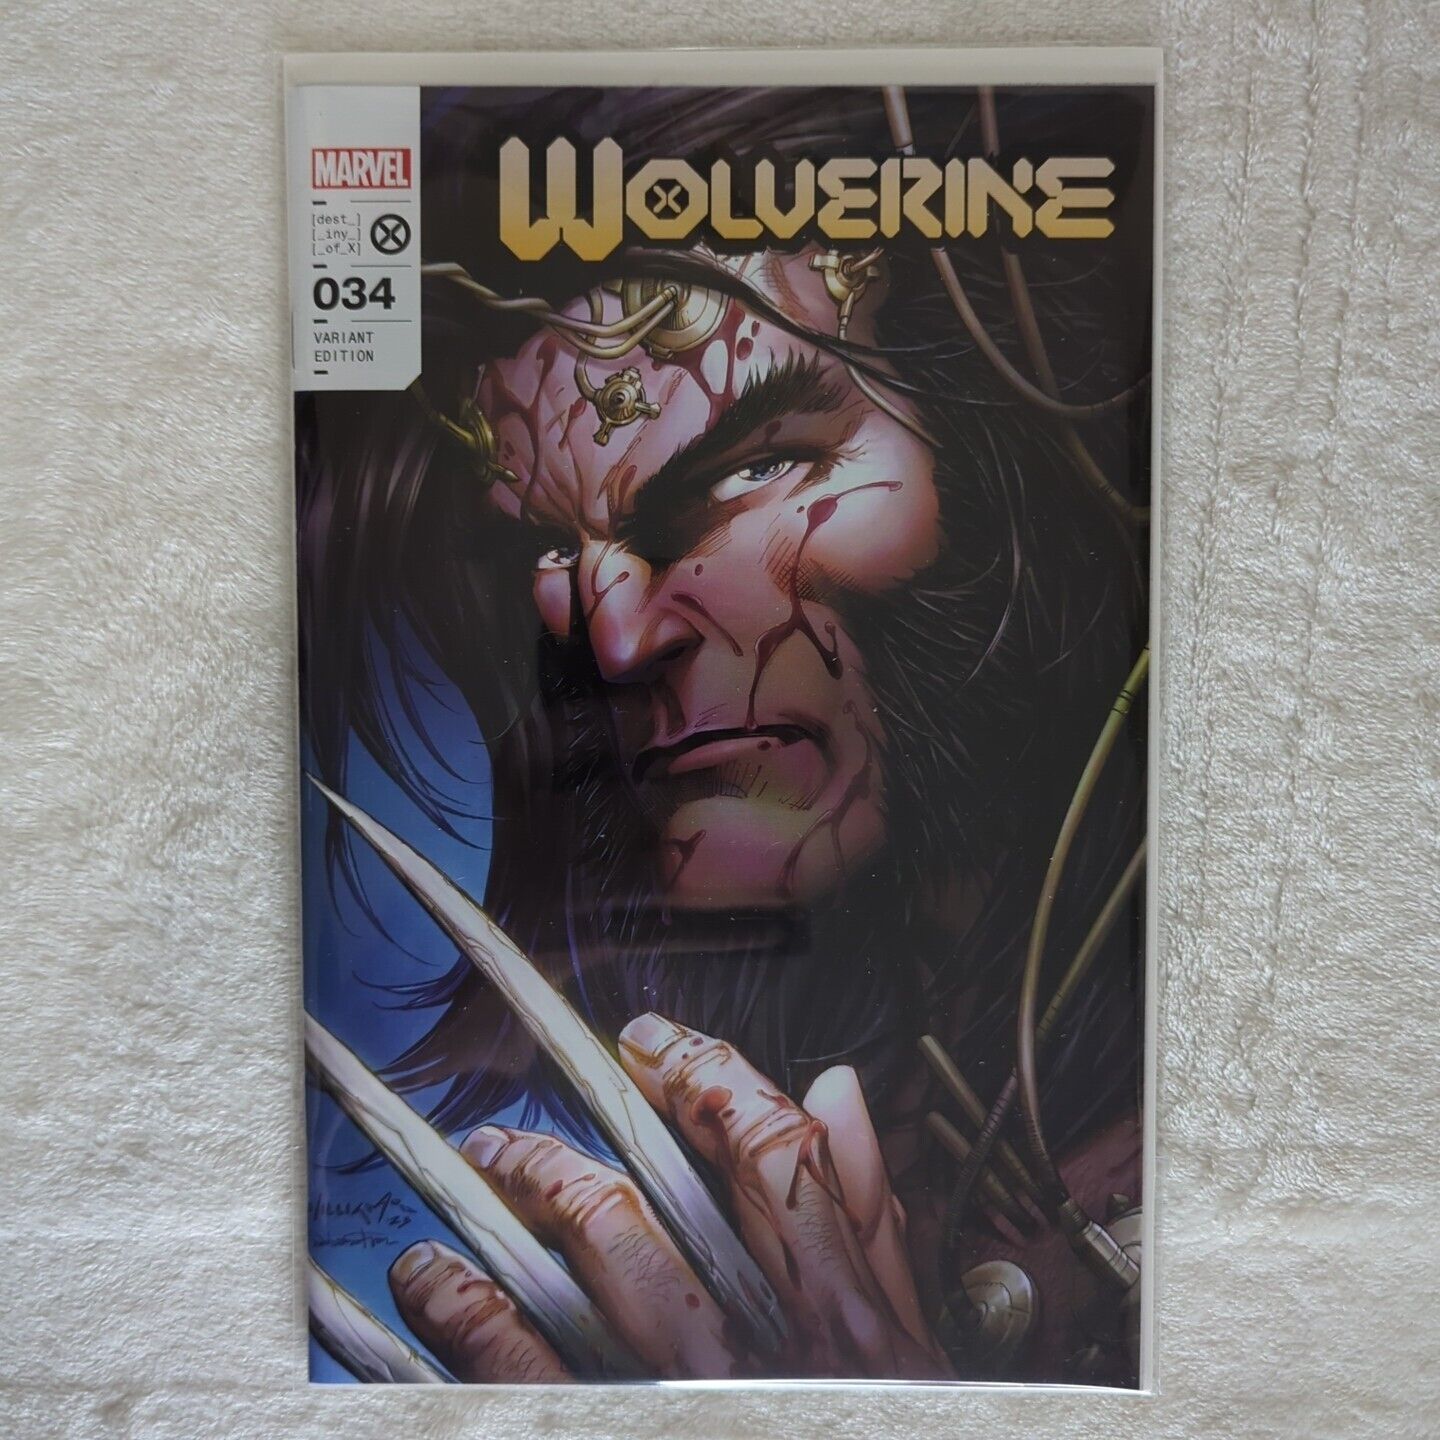 Wolverine #34 Variant Scott Williams Trade Dress Exclusive Cover 2023 Marvel